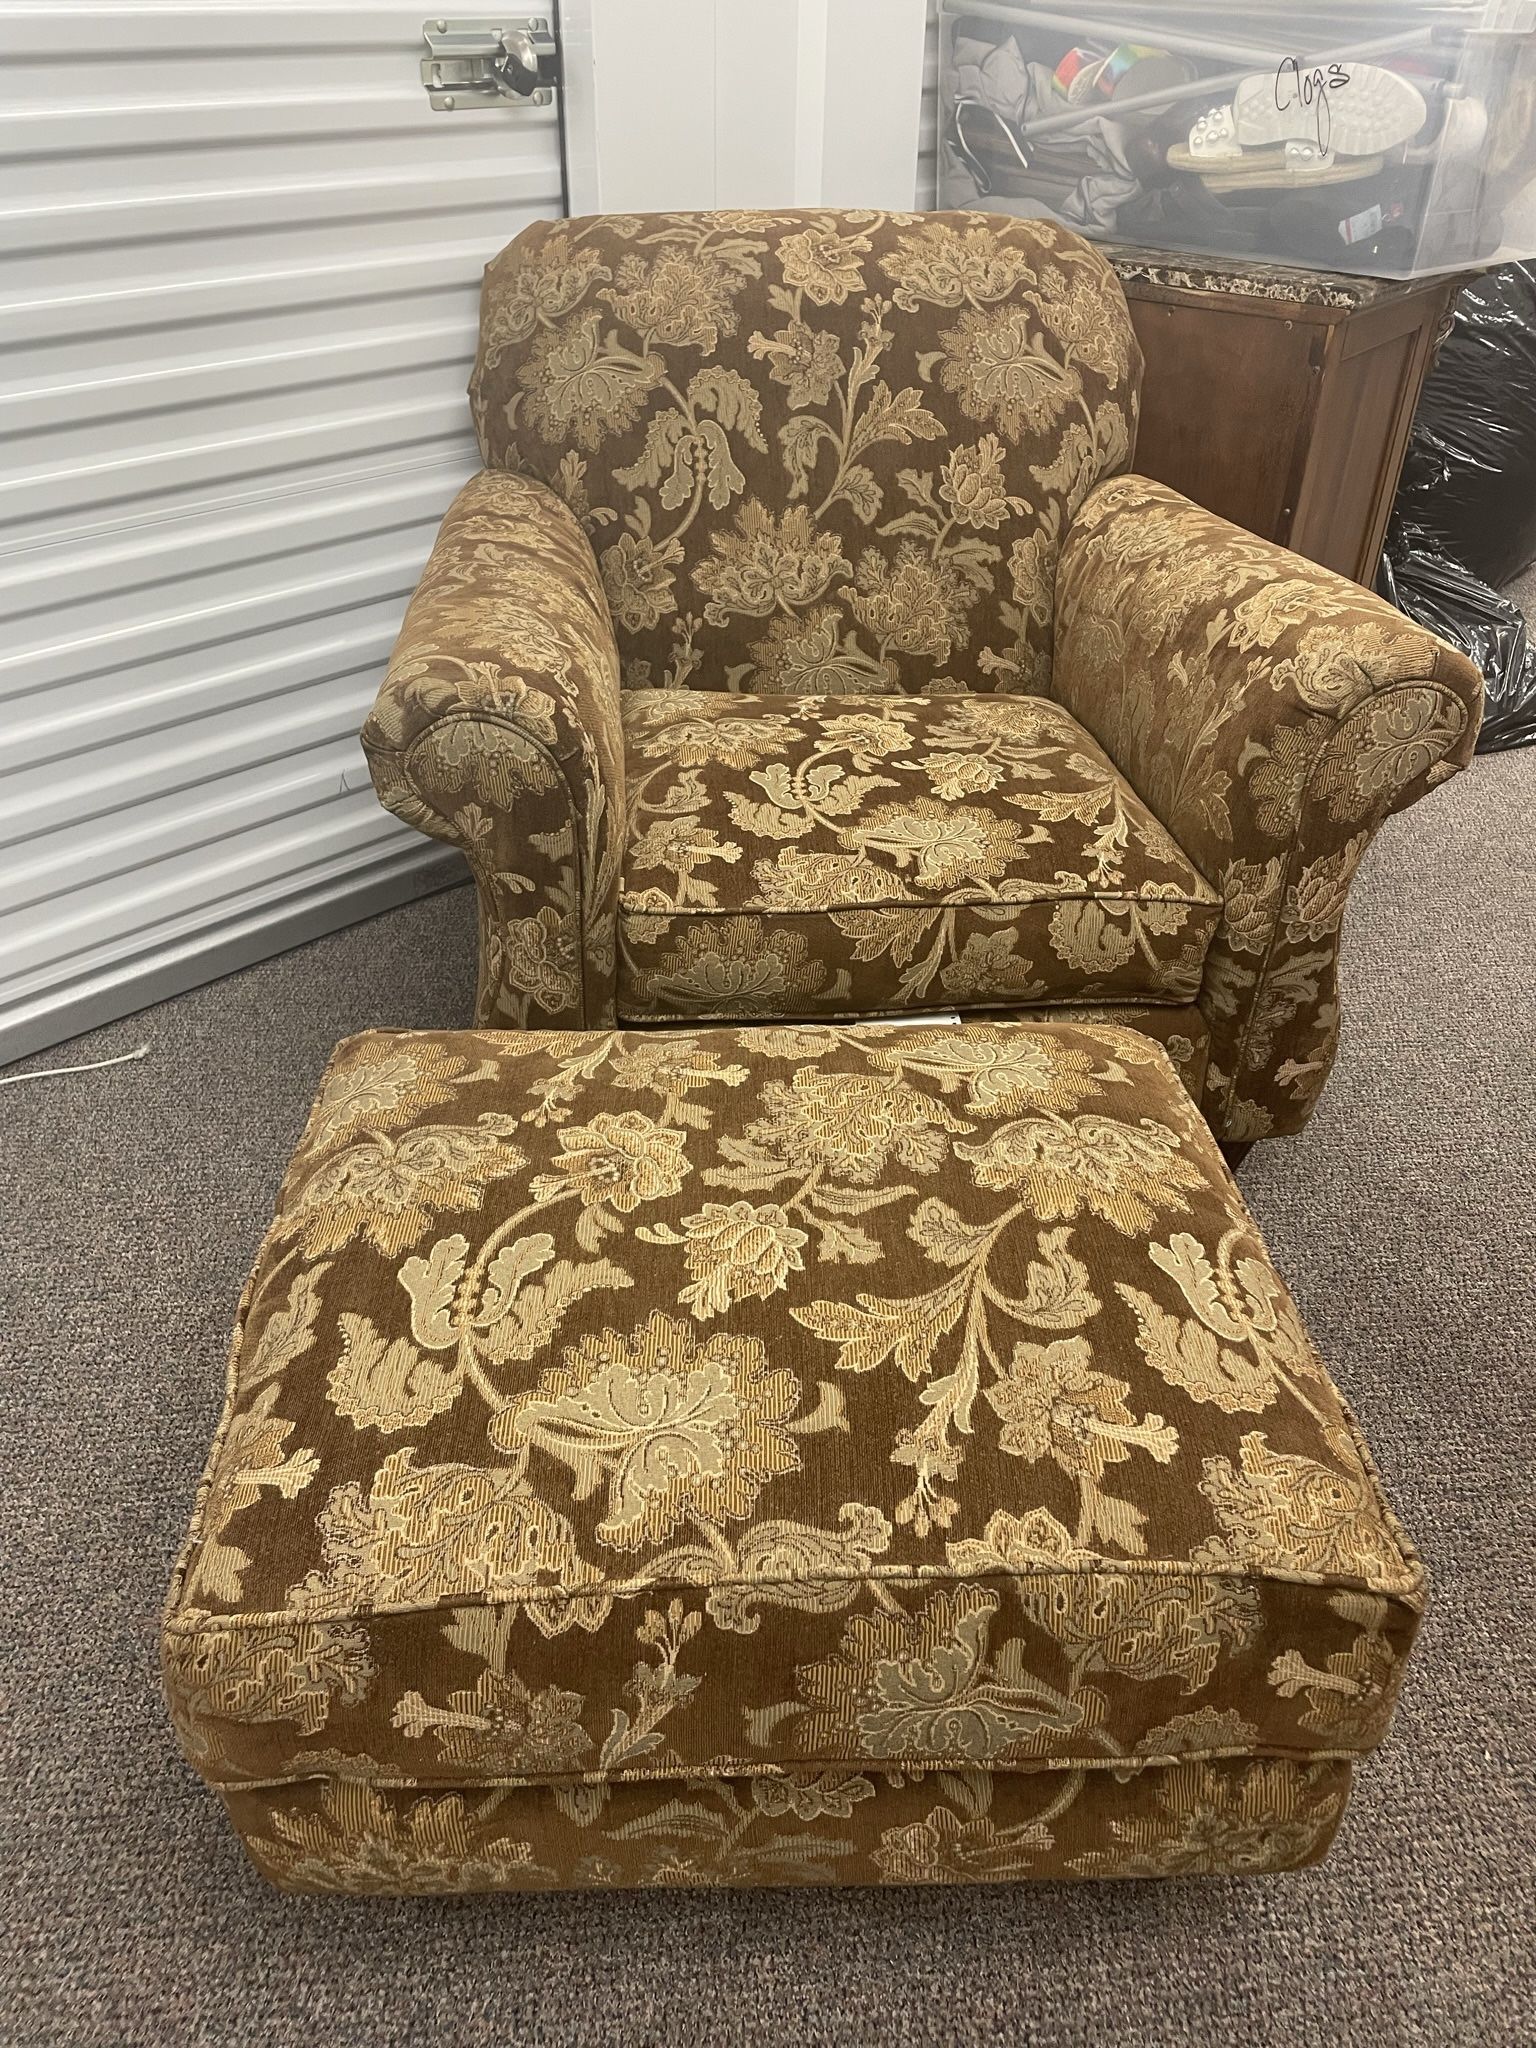 Chair and Matching Ottoman 